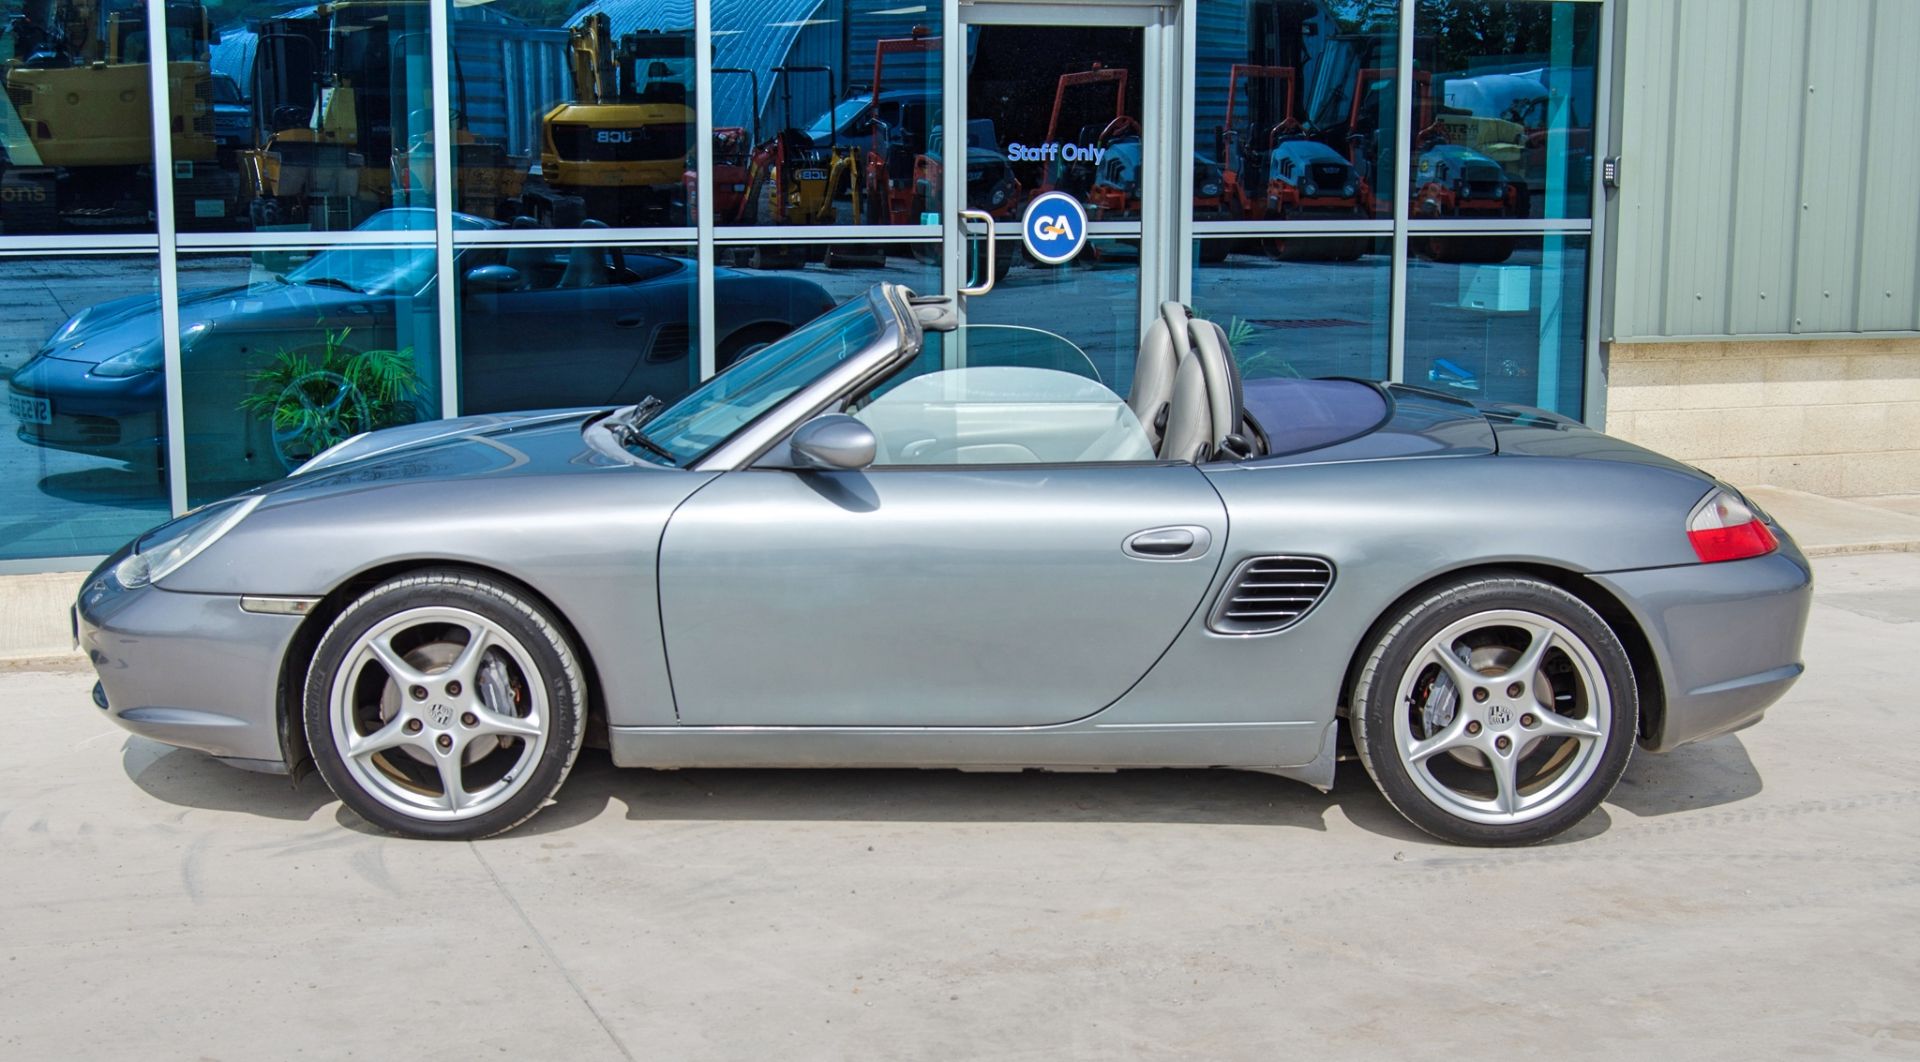 2003 Porsche Boxster 2.7 5 speed manual convertible roadster - Image 16 of 50